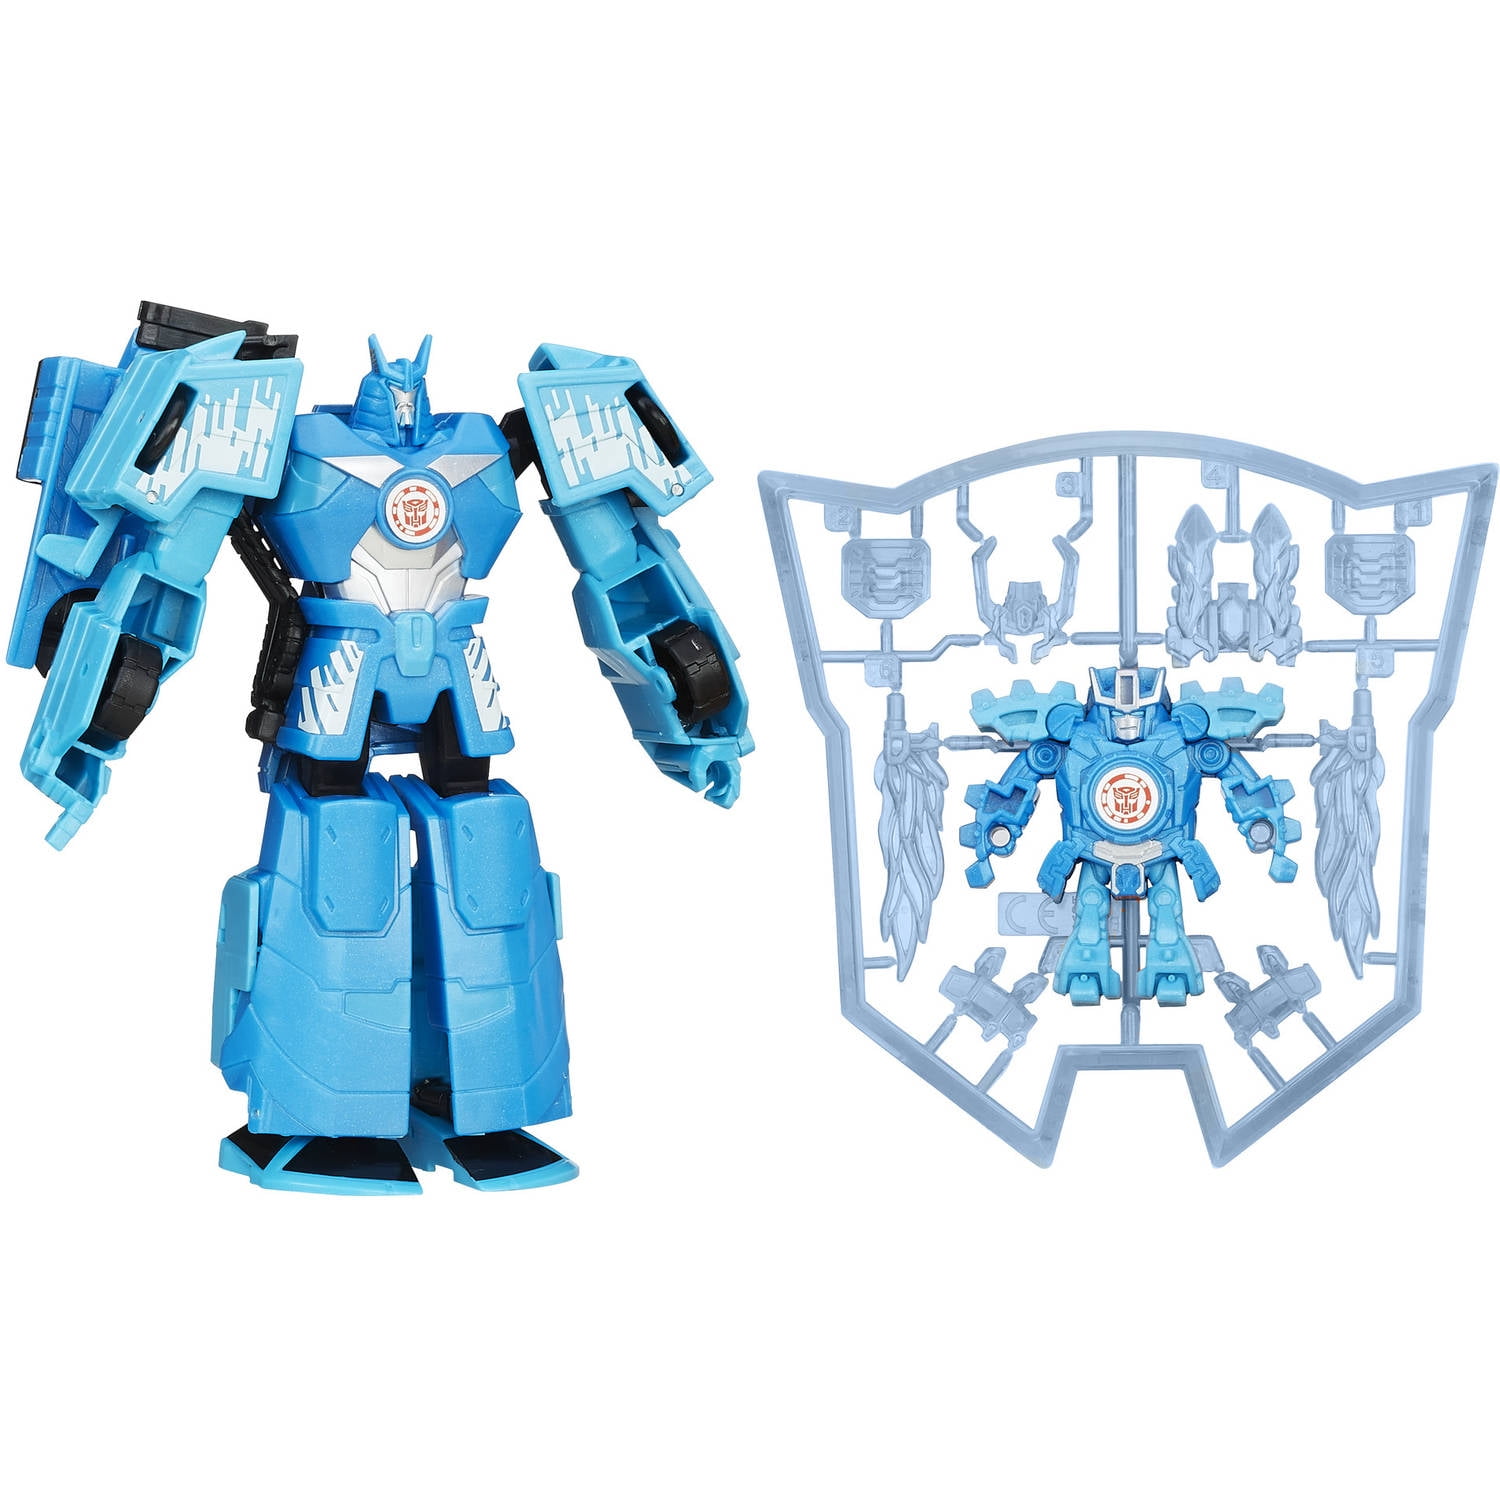 Transformers Robots in Disguise Mini 